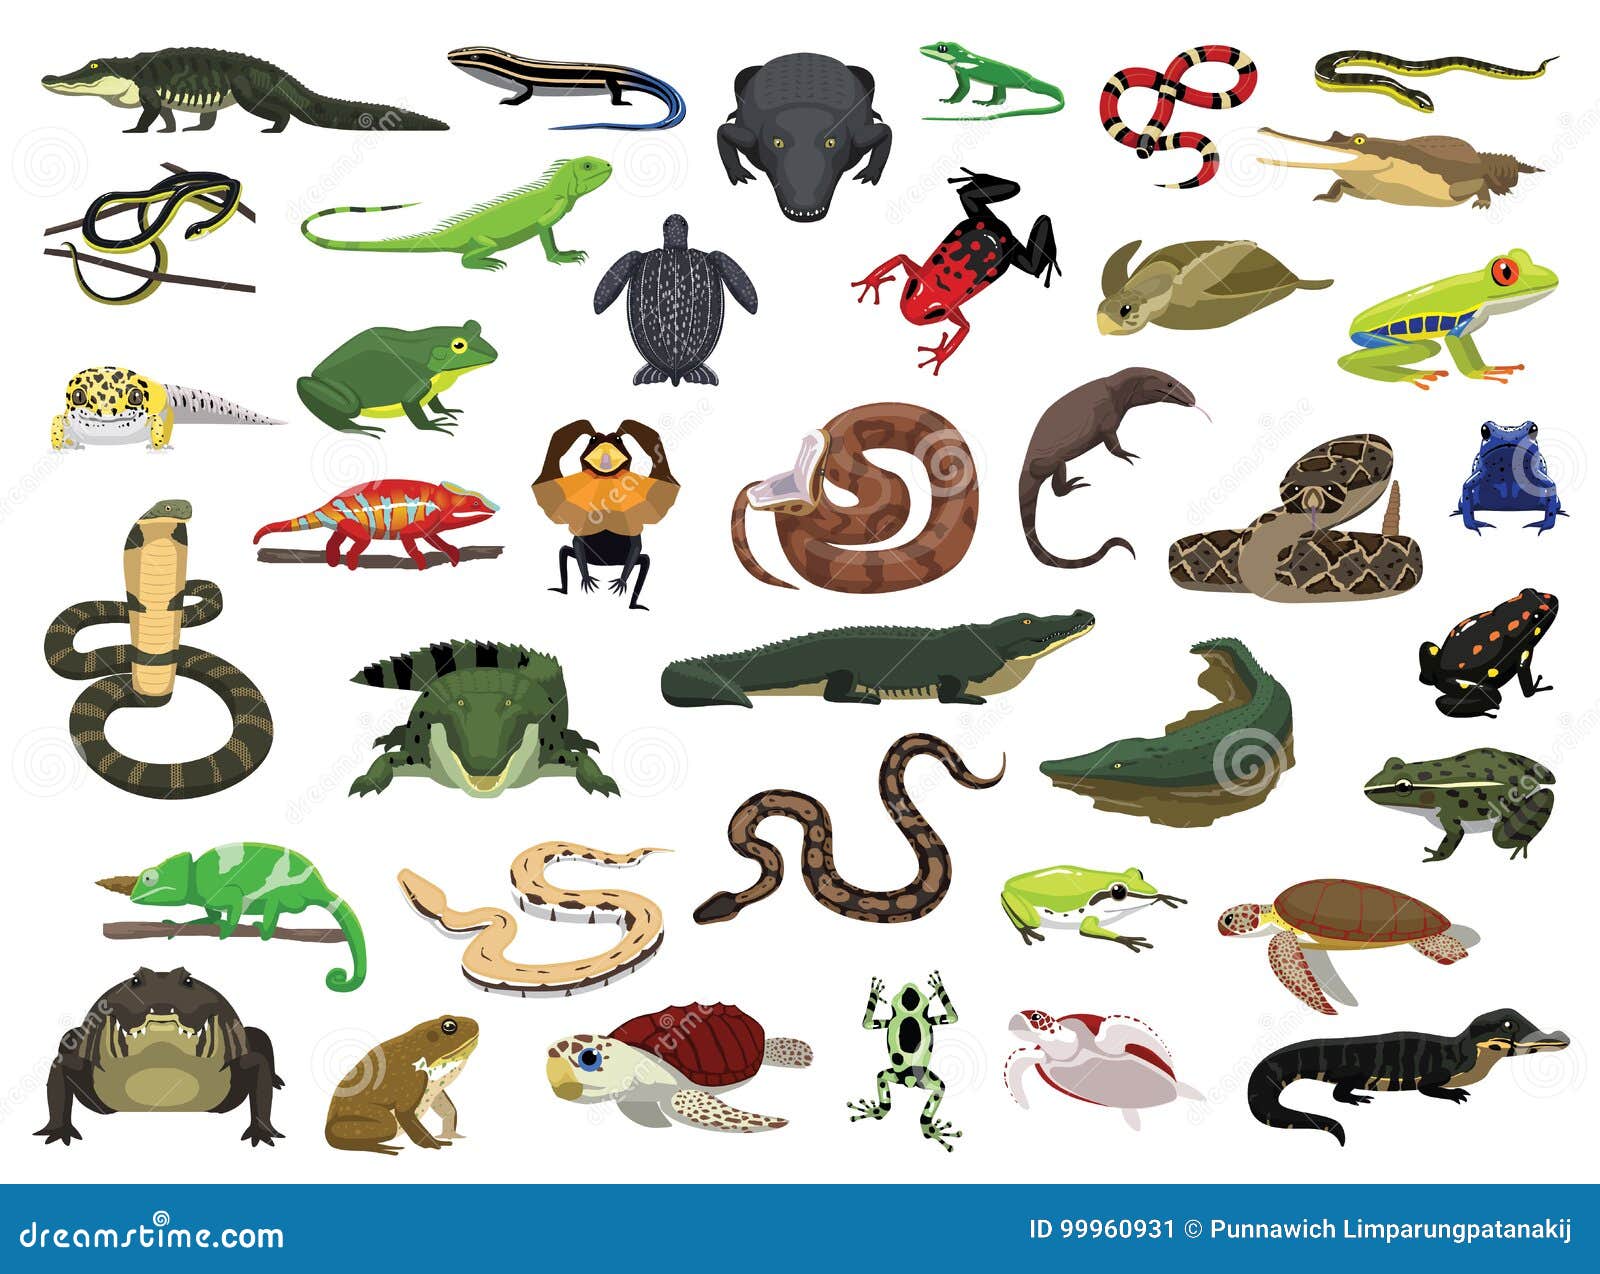 Various Reptile And Amphibian Vector Illustration Stock ...